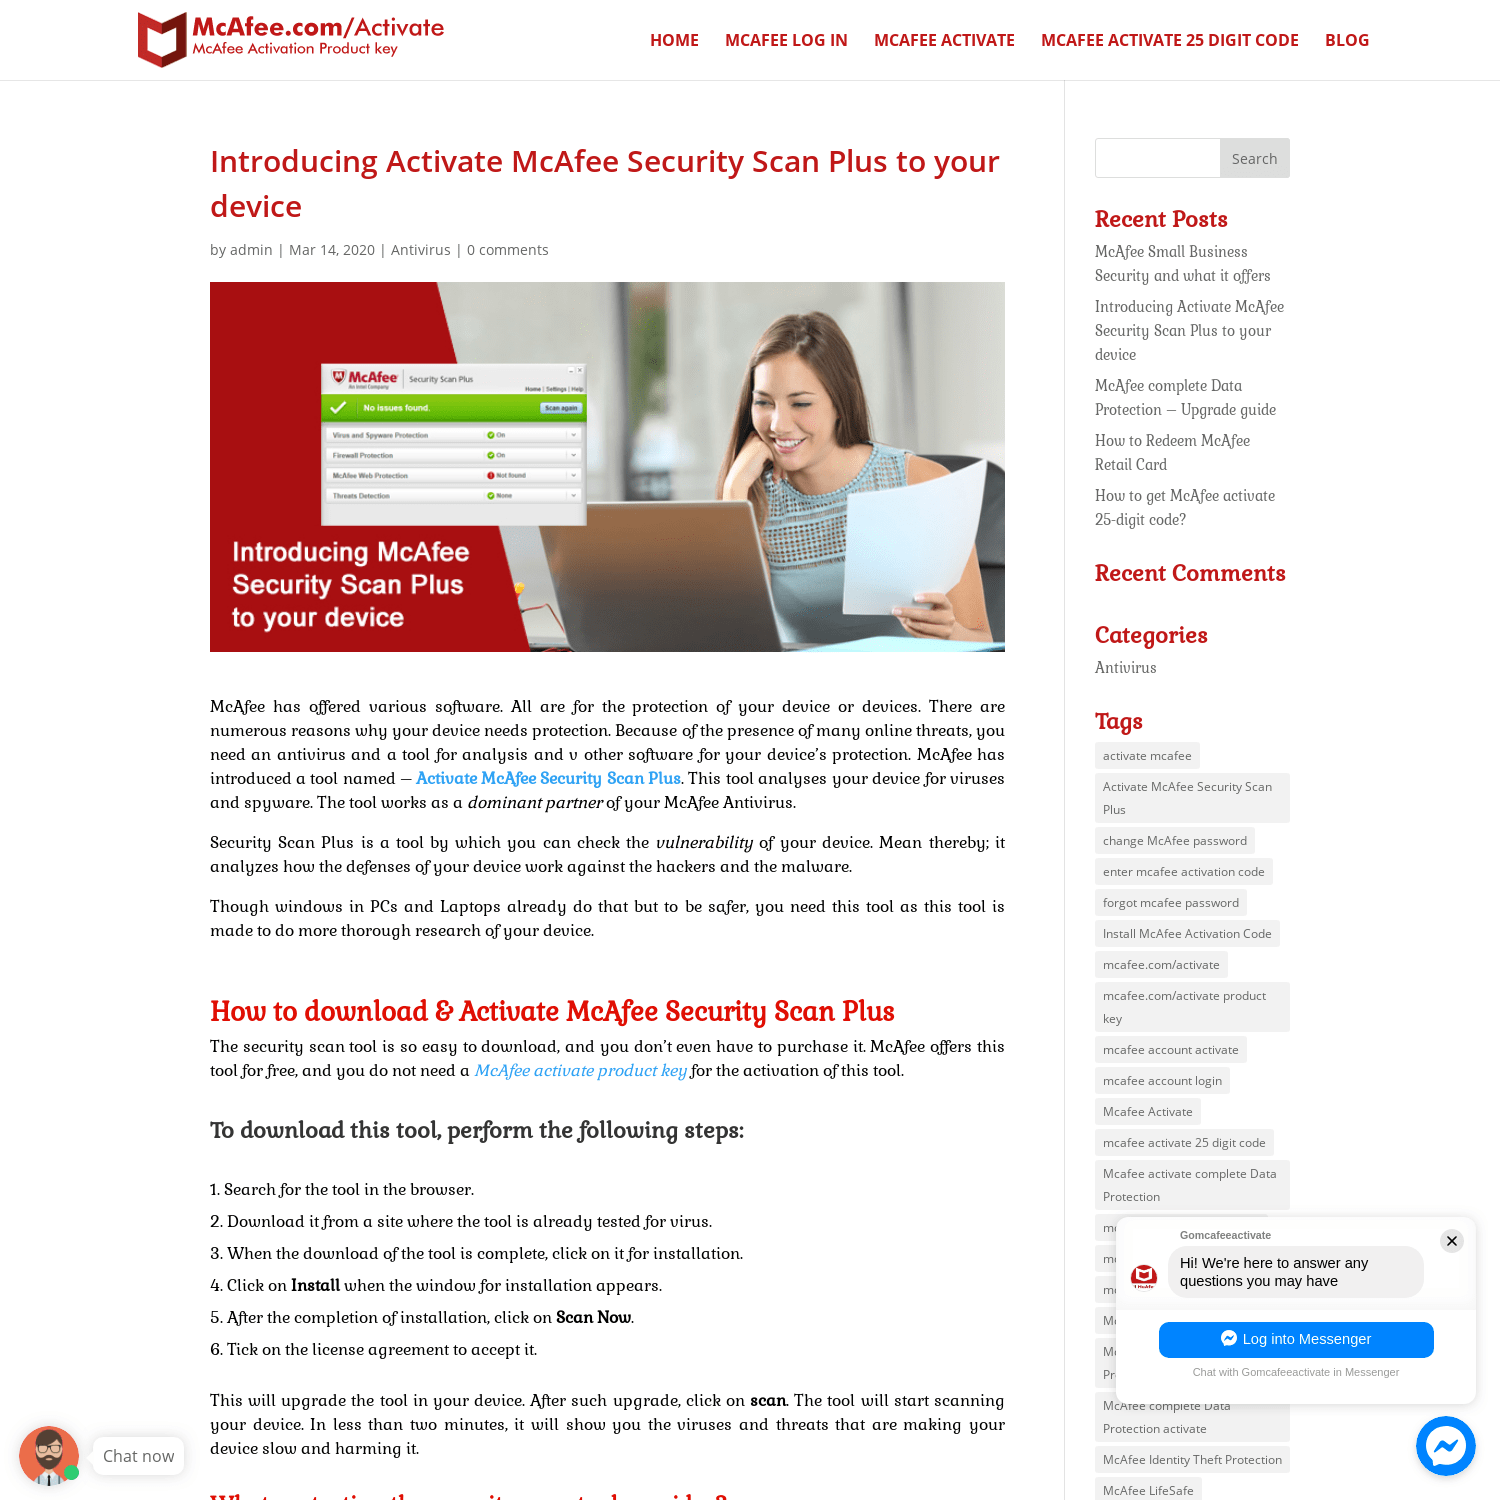 Introducing Activate McAfee Security Scan Plus to your device